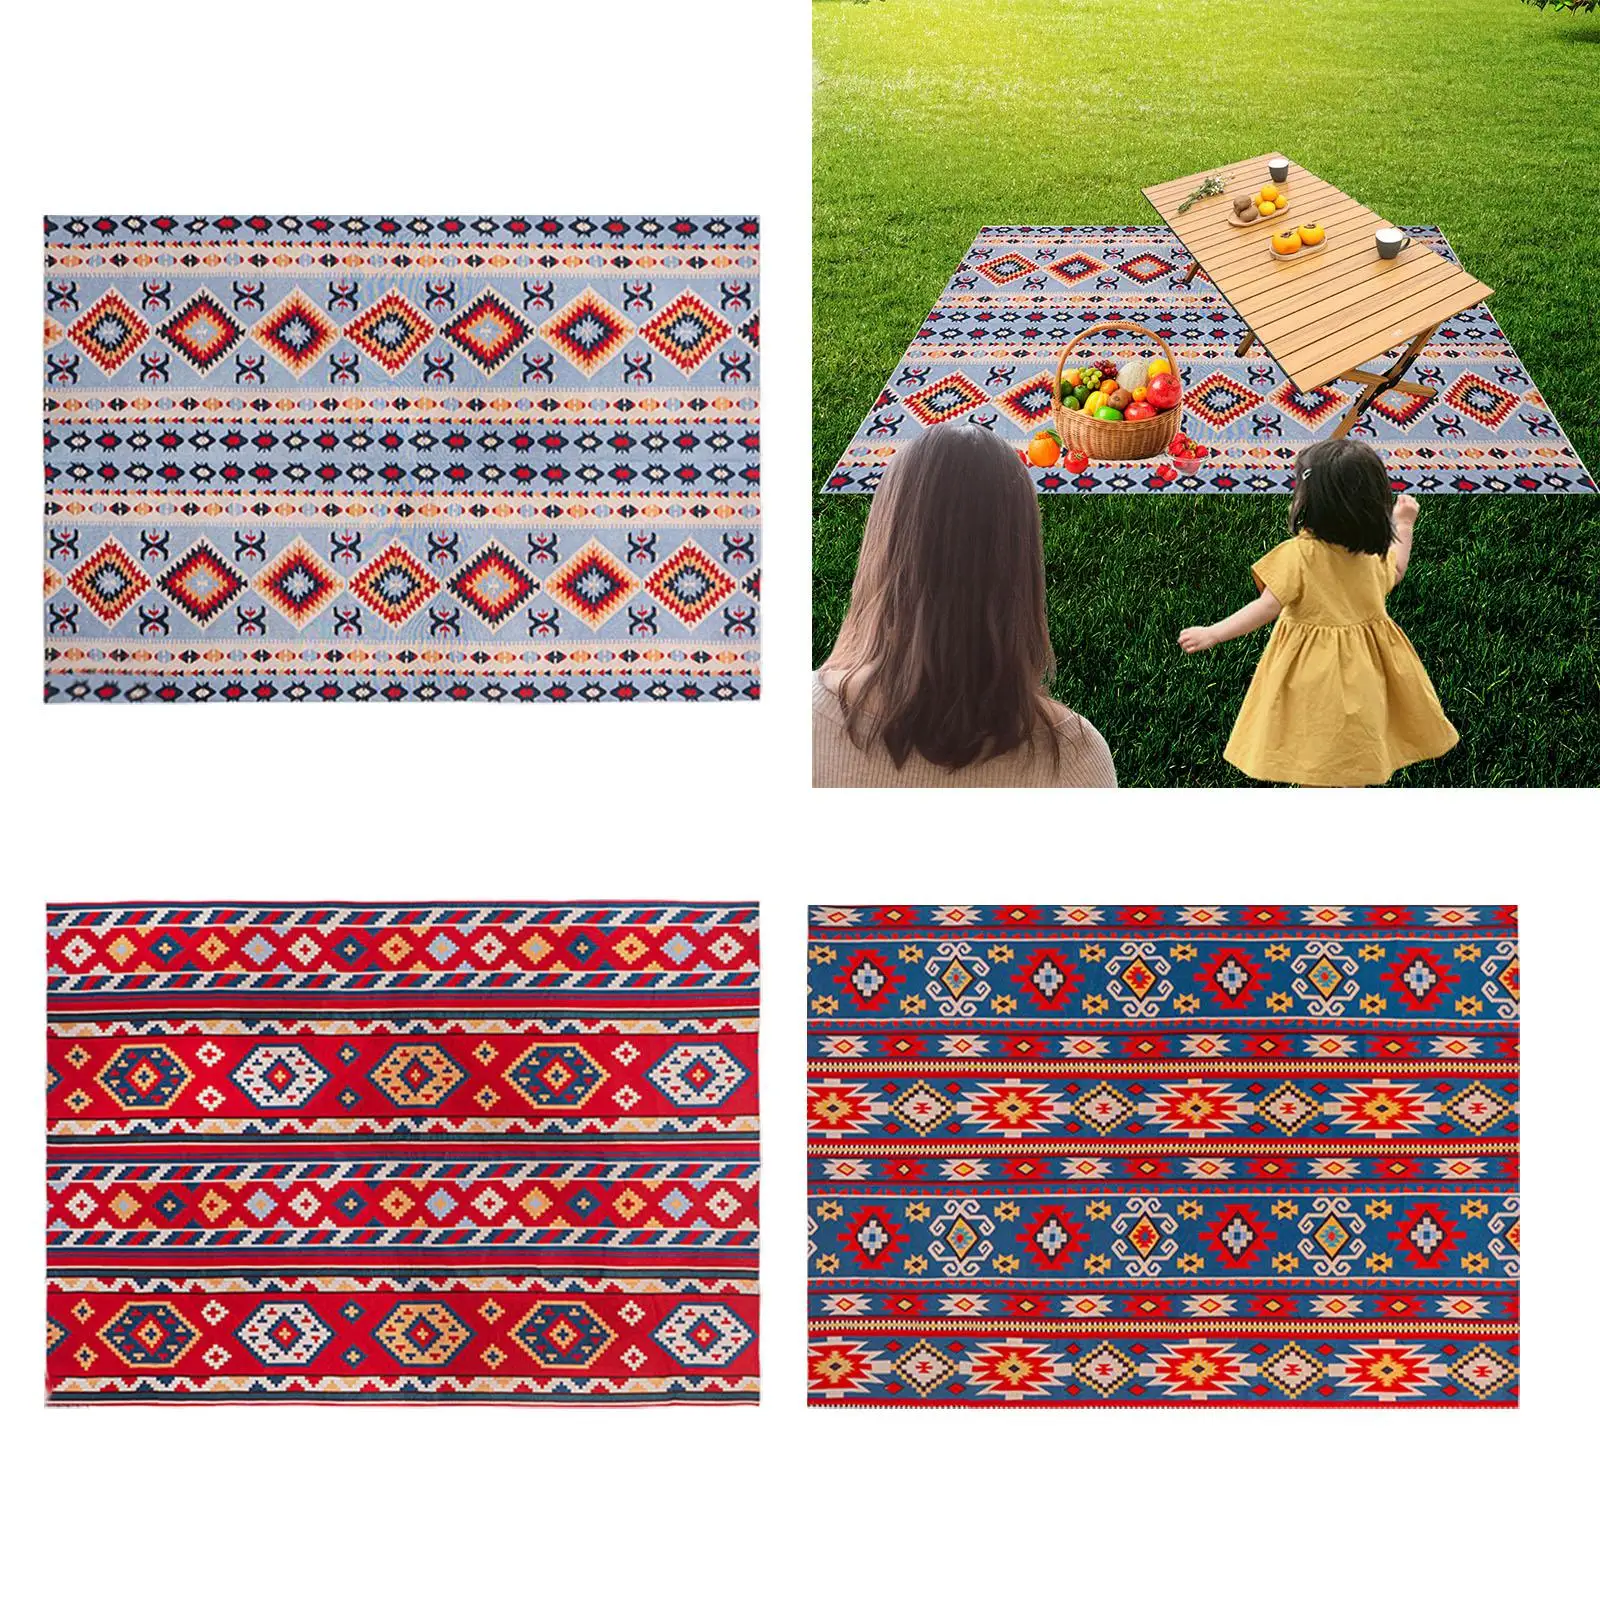 Large Picnic Outdoor Blanket Waterproof Family Mat Portable Outdoor Mat Camping Blanket for Grass Travel Beach Sports Camping